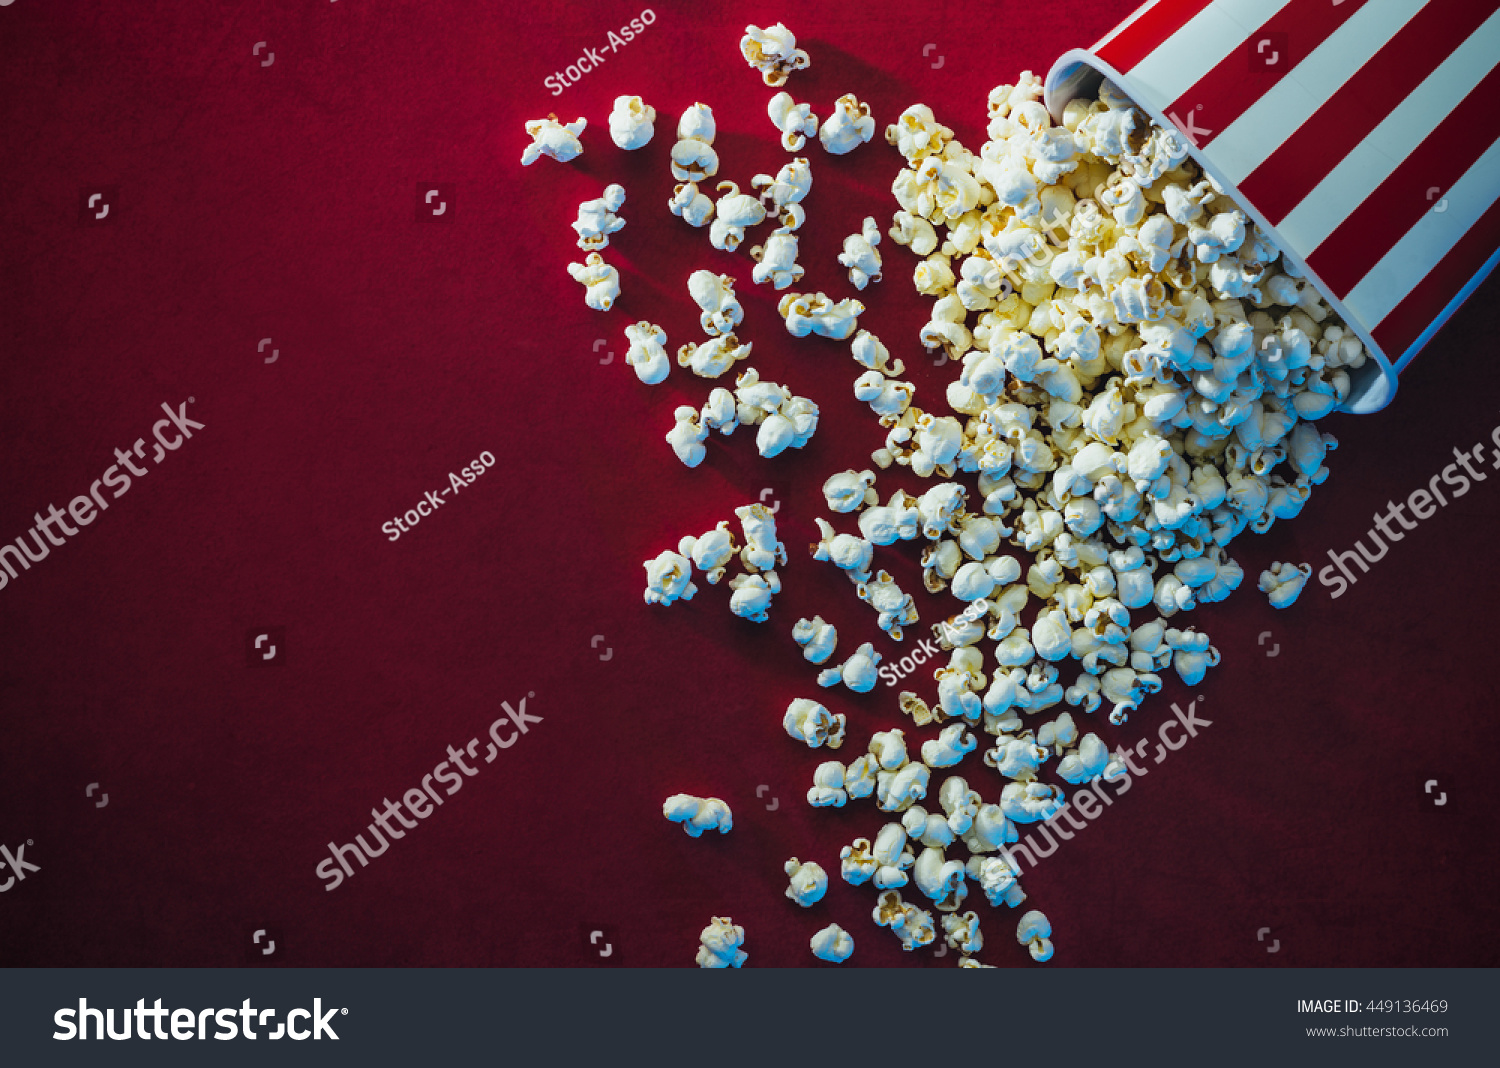 Spilled popcorn on a red background, cinema, movies and entertainment concept #449136469